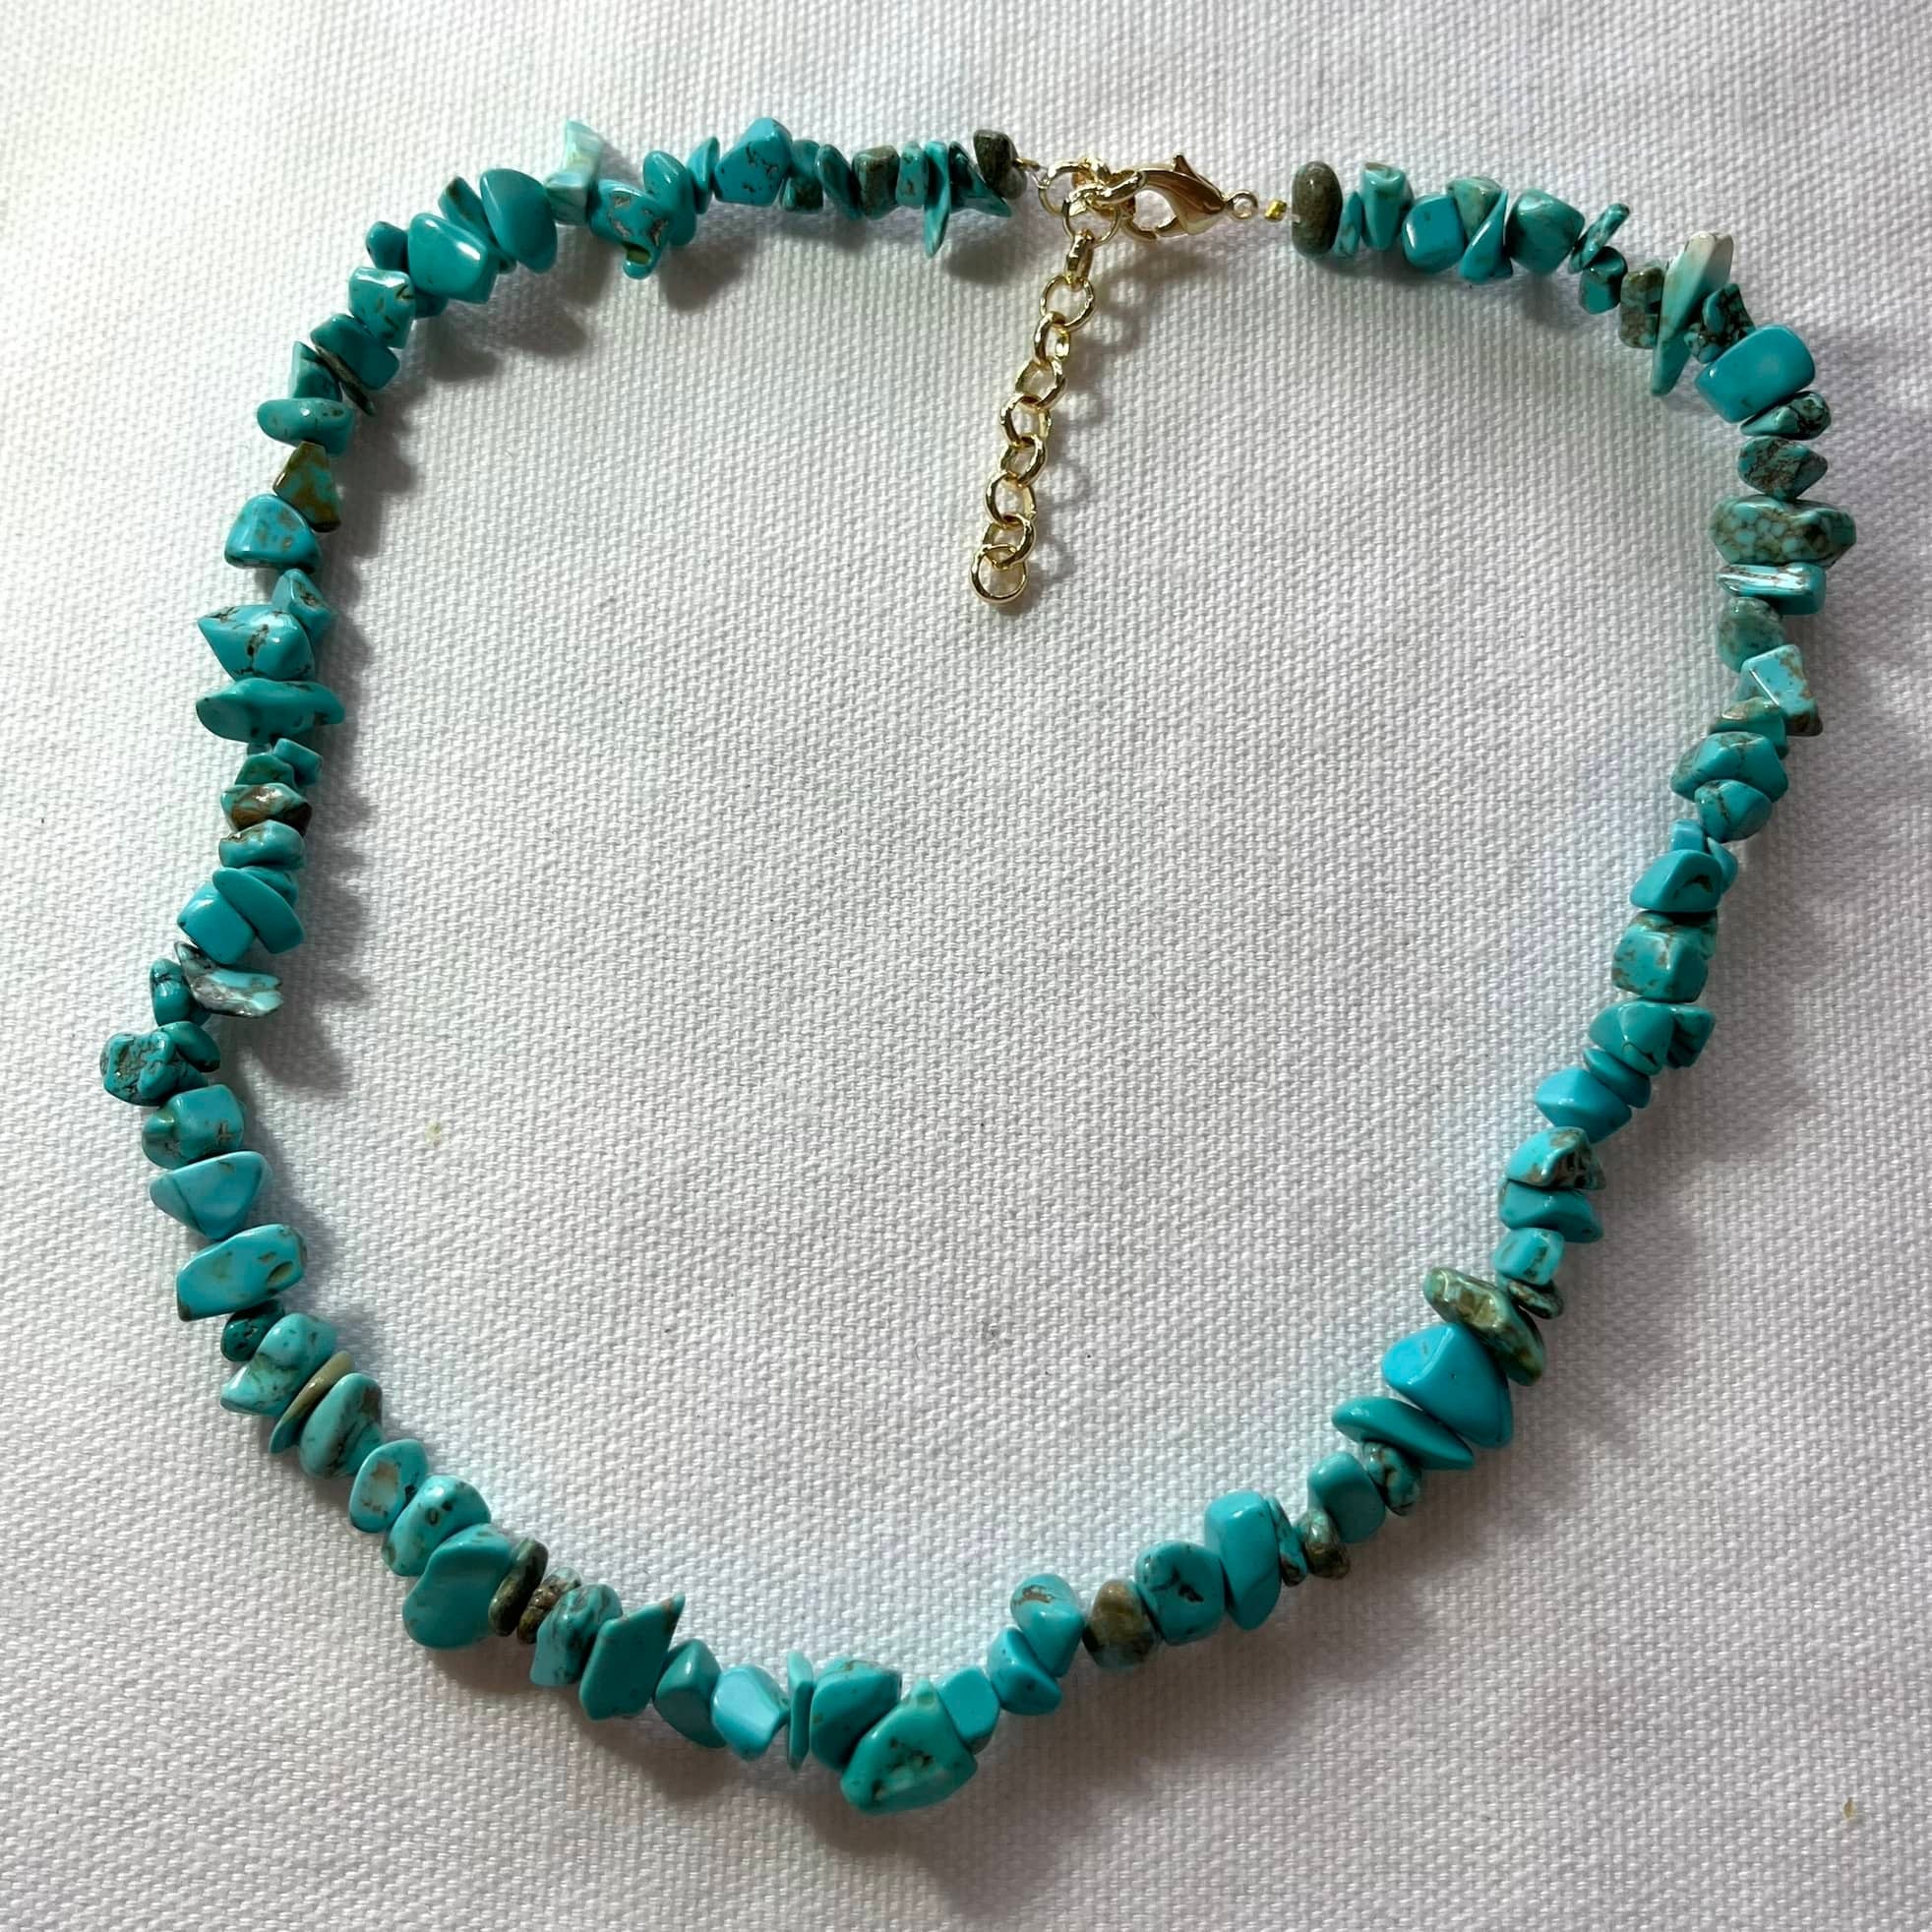 Turquoise Chip Multi-Strand Necklace – Corazon Sterling Silver from Taxco